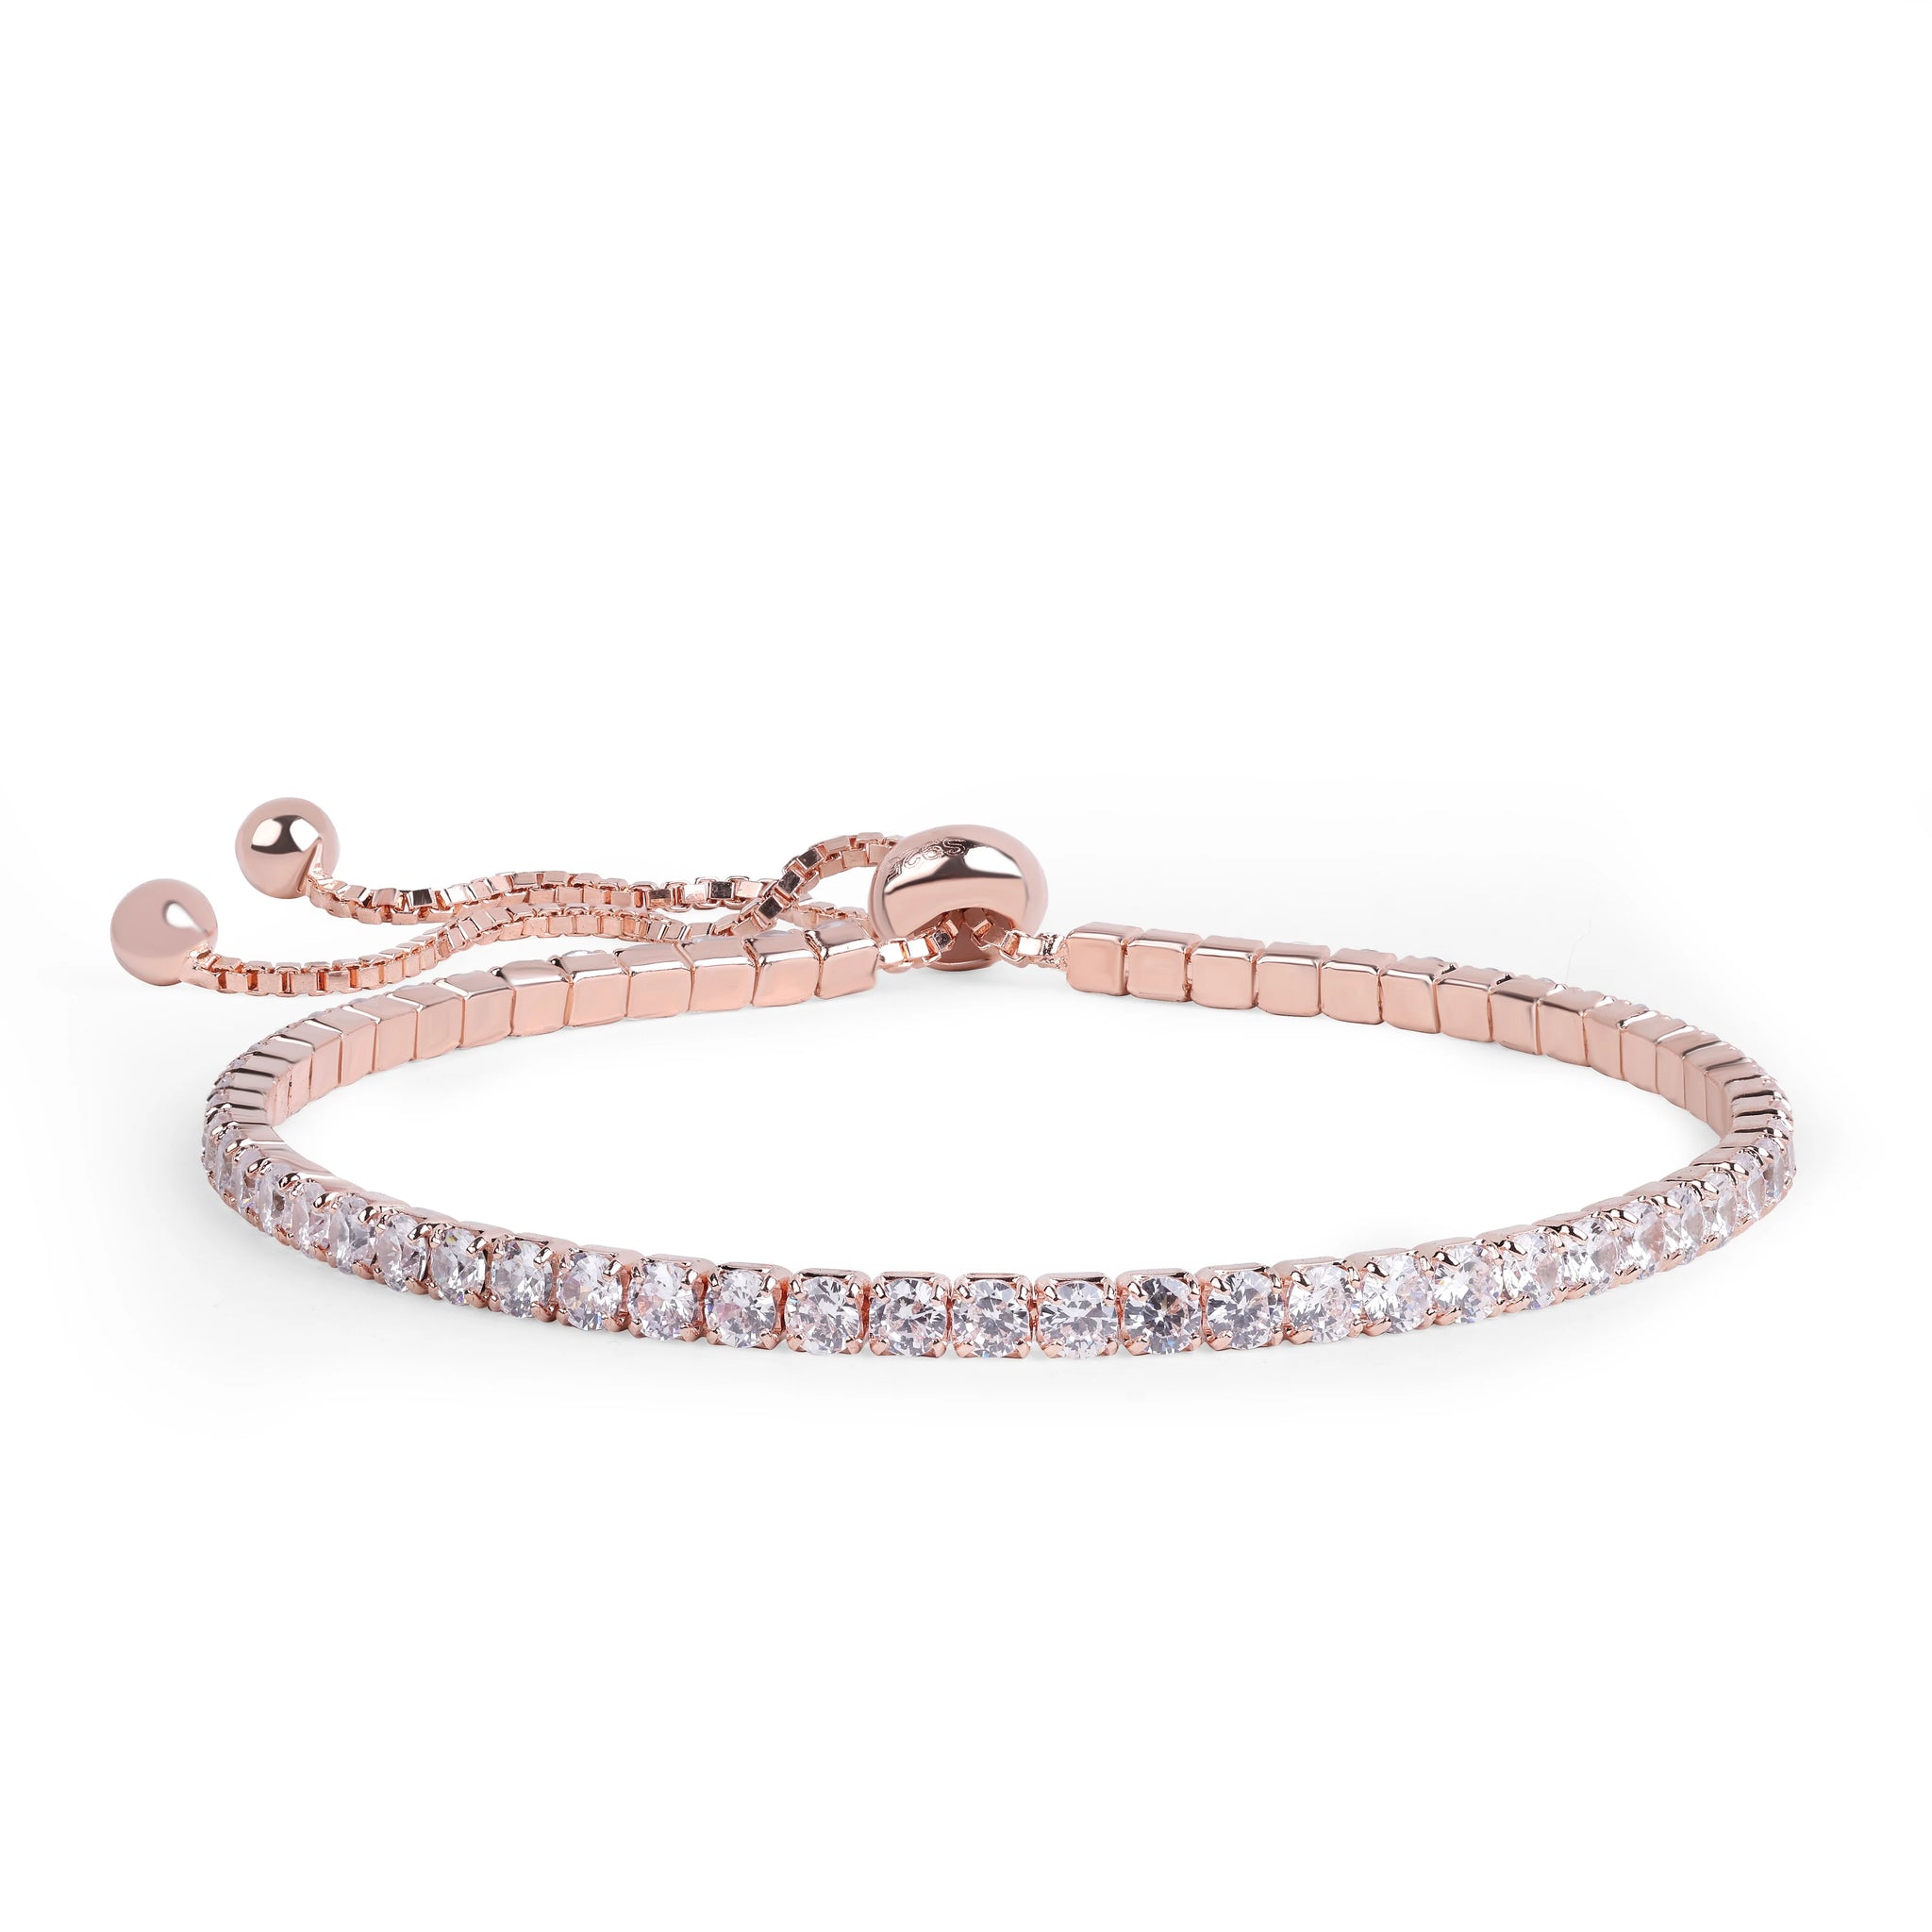 Glendy Rose Gold Plated Tennis Silver Bracelet With Adjustable Chain